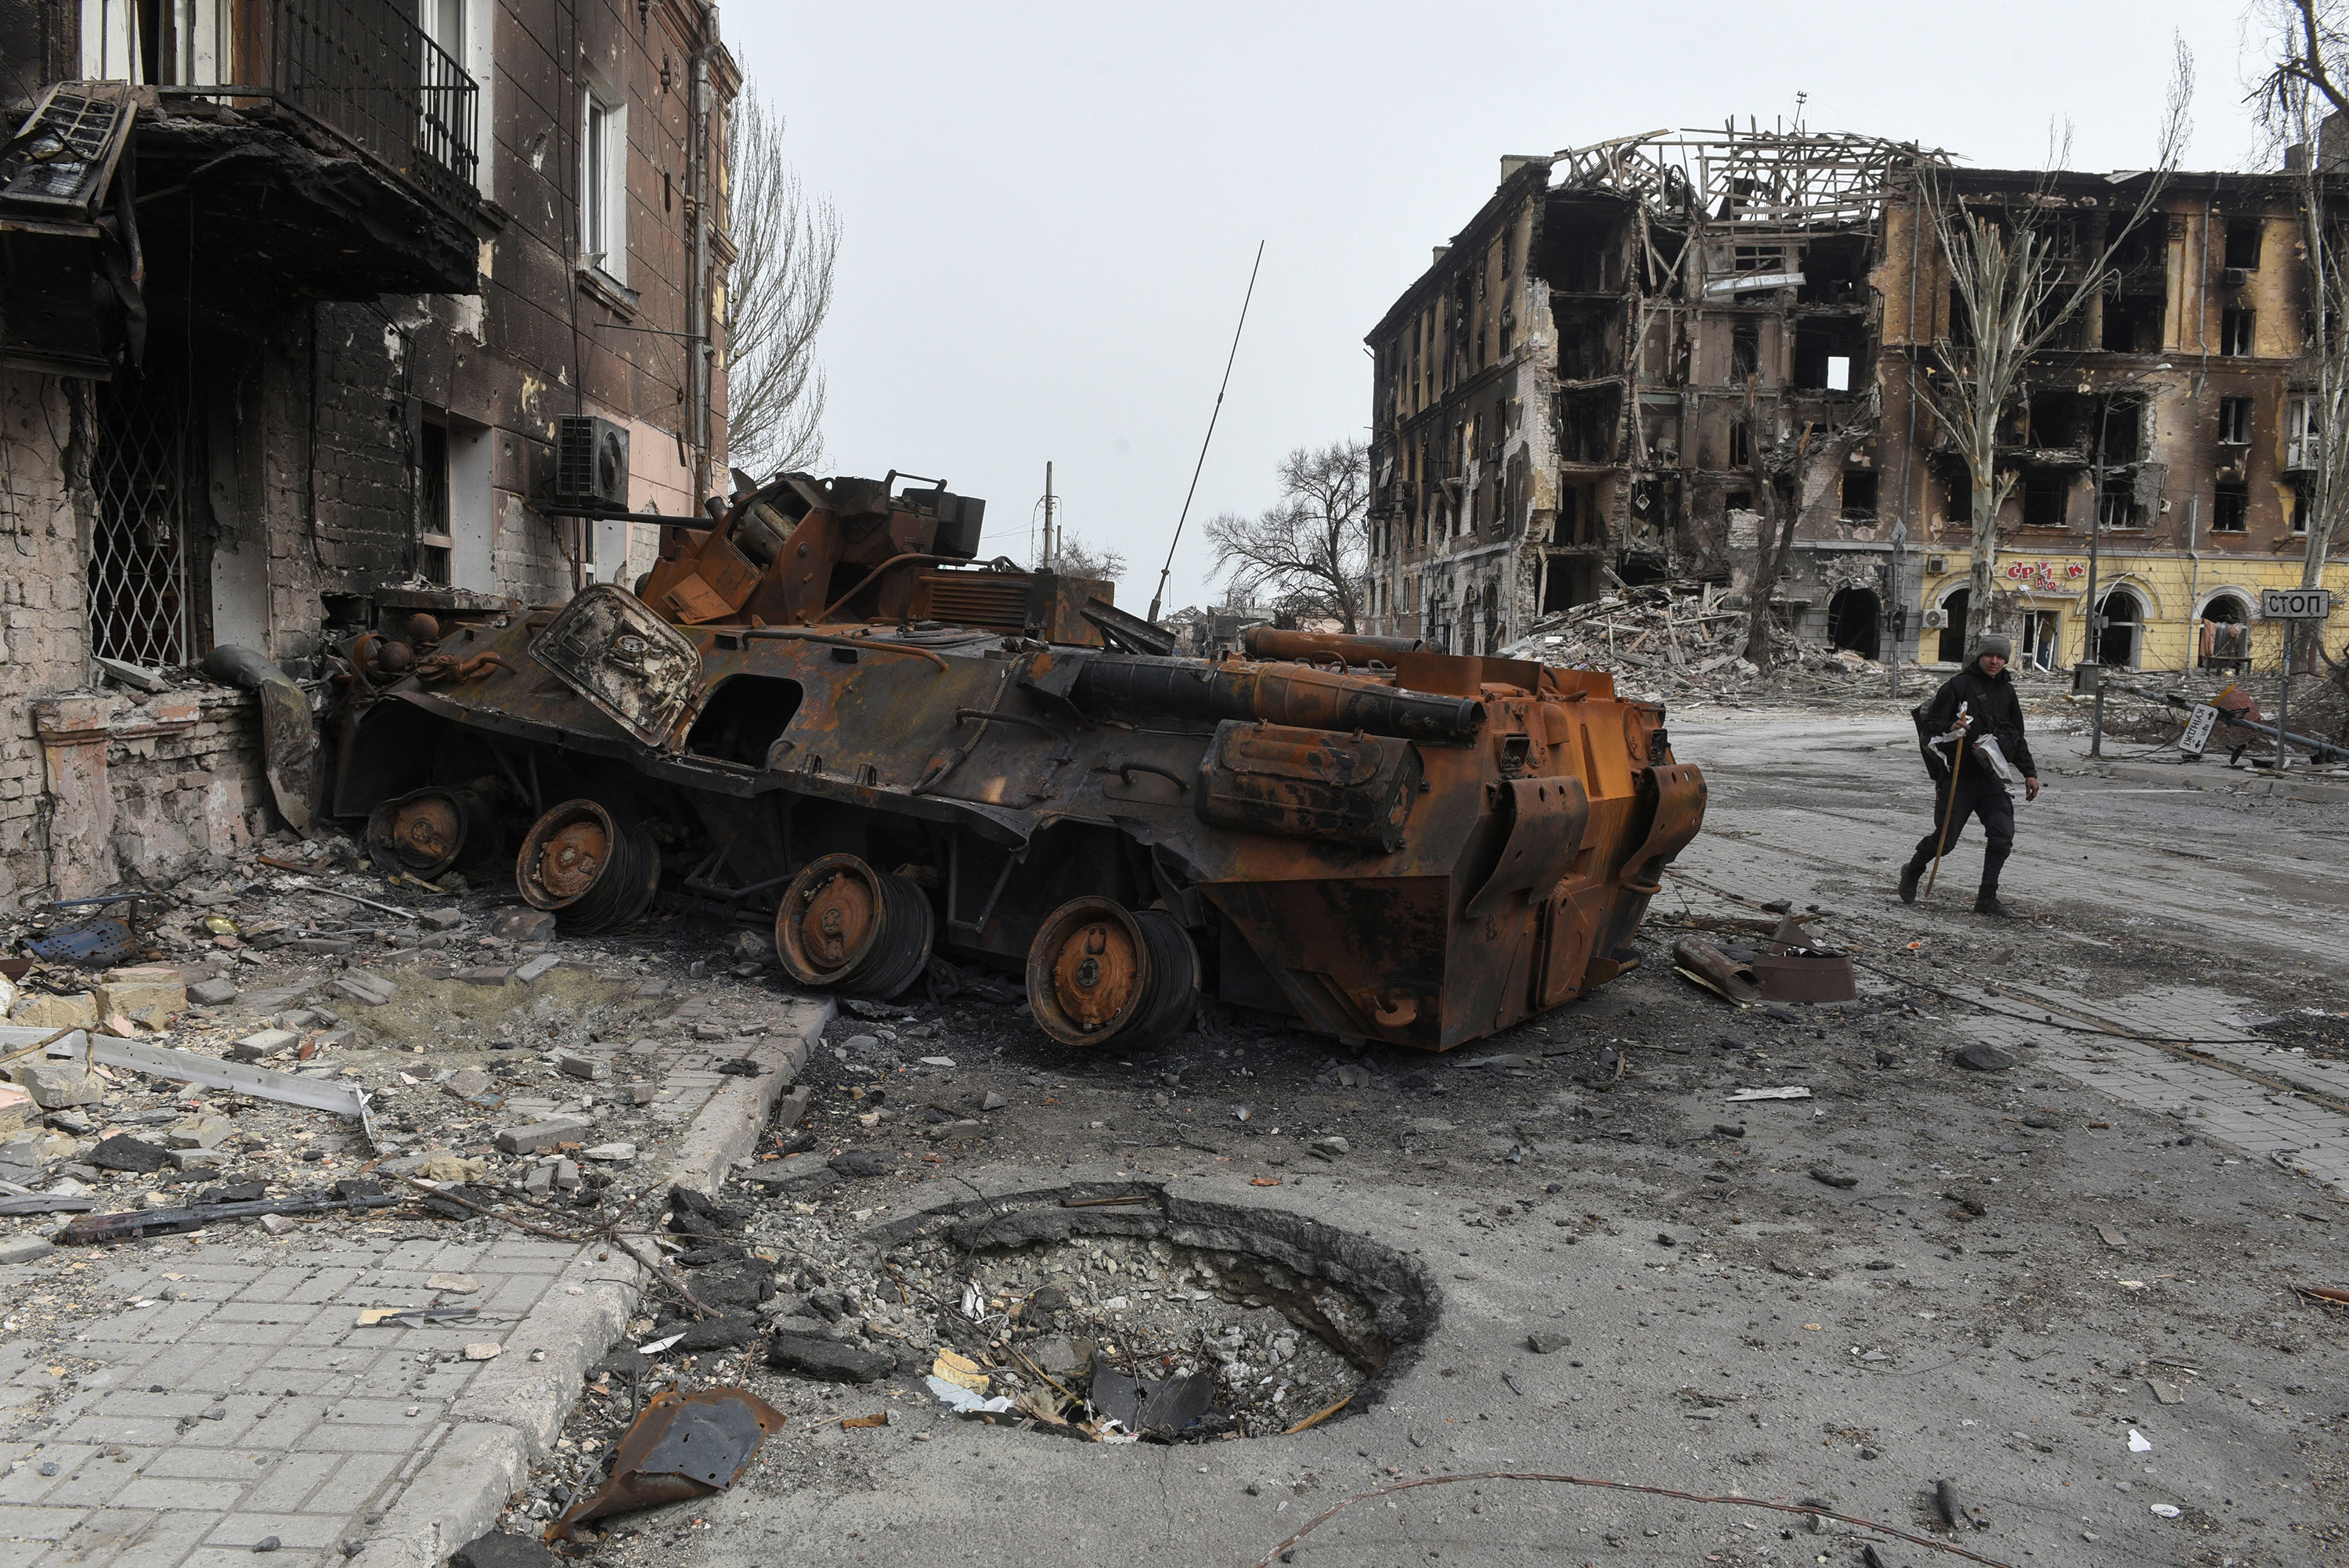 A man walks past a destroyed vehicle in Mariupol, Ukraine, on April 1.